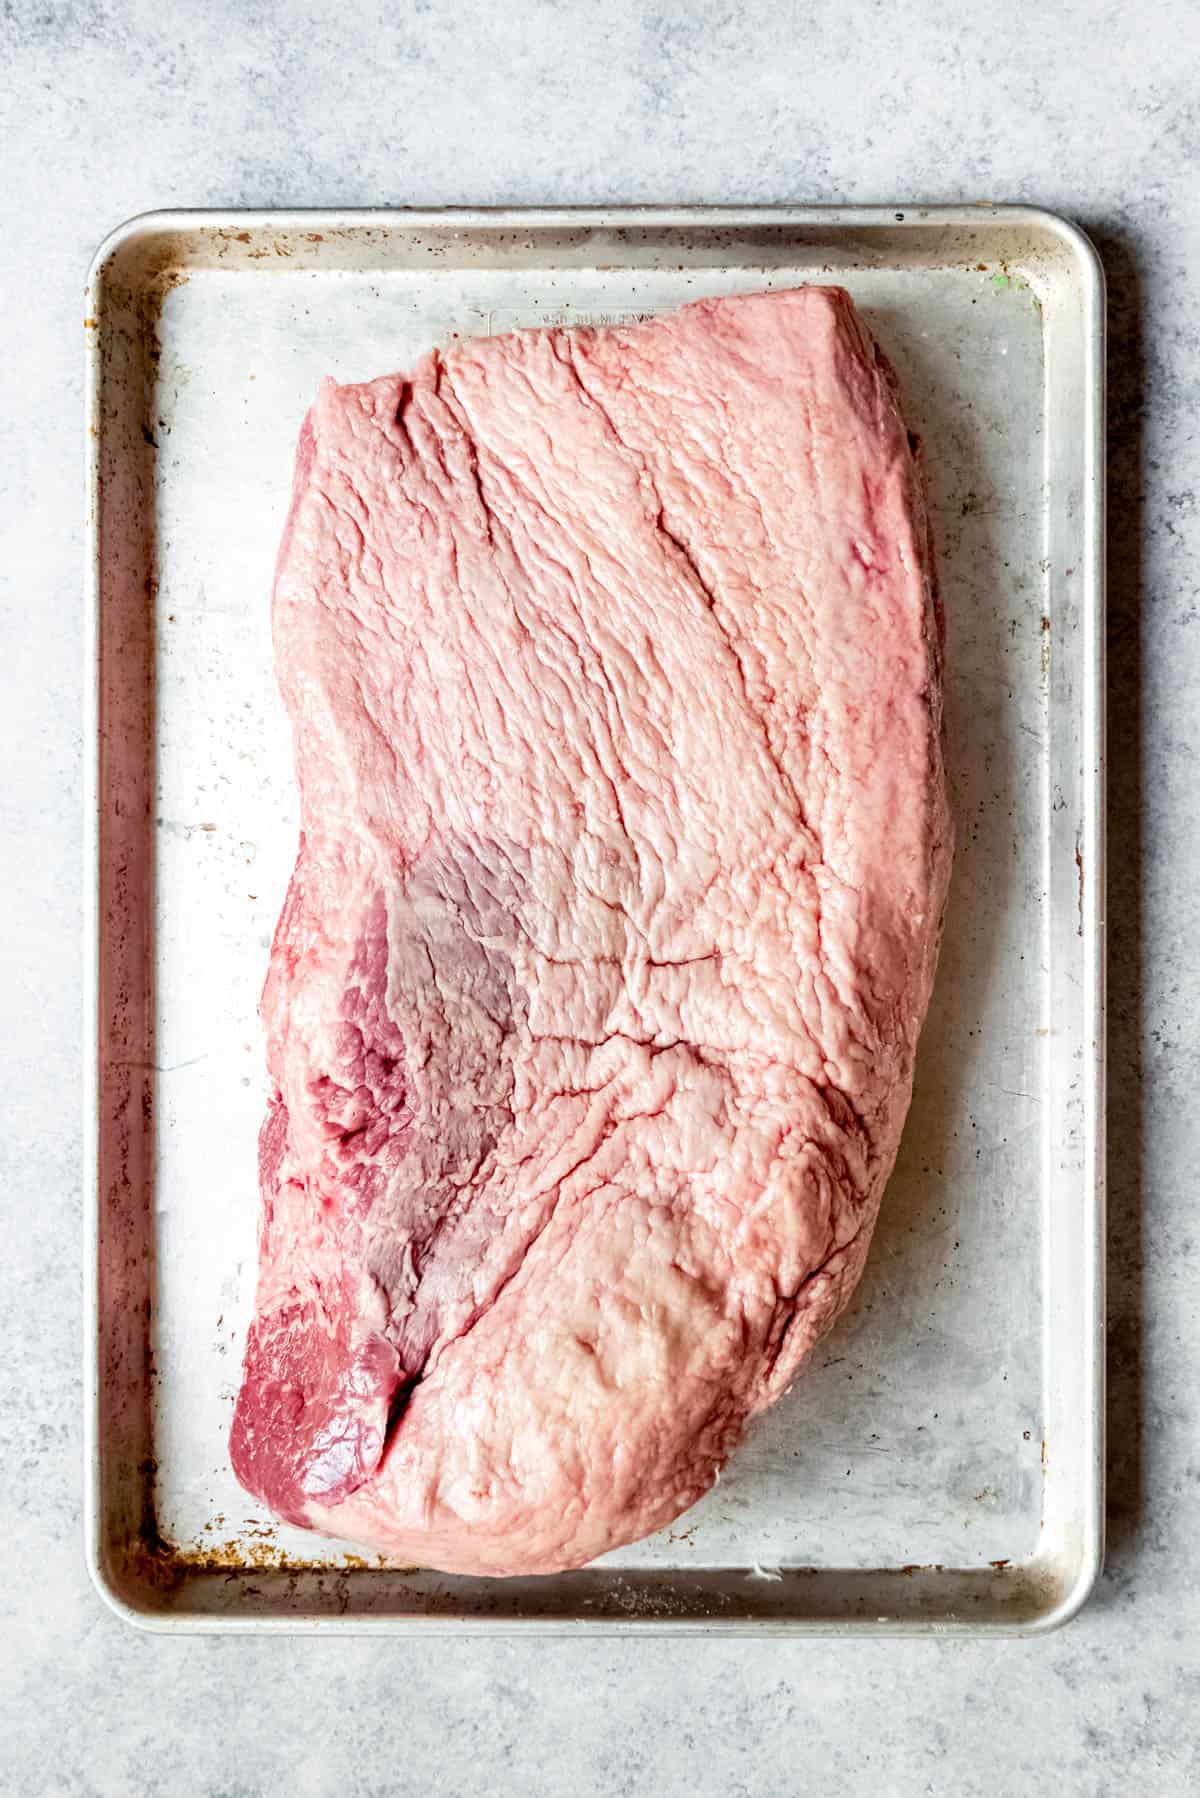 An image of the fat cap side of a packer brisket.